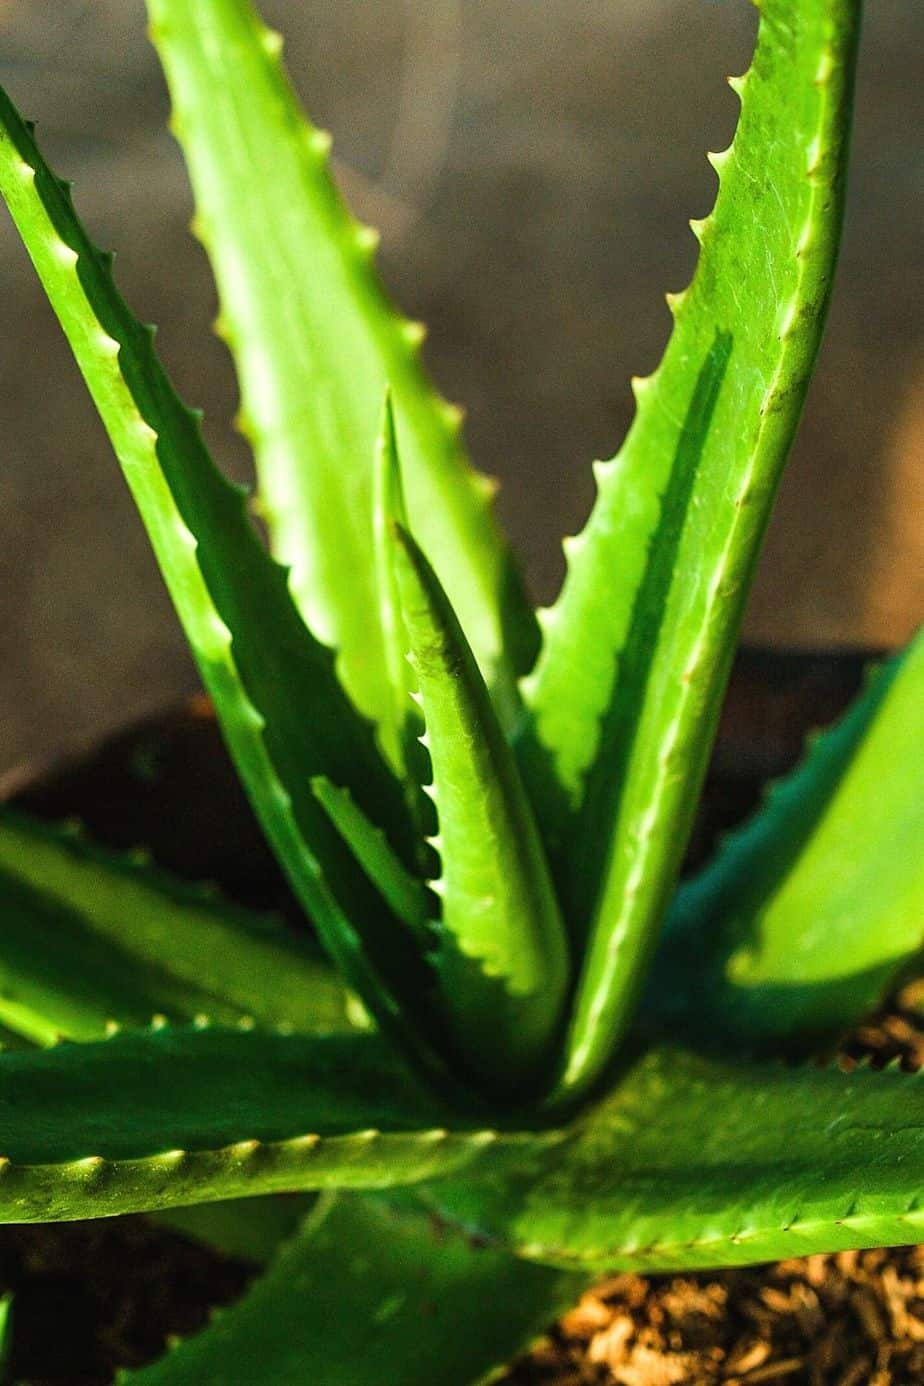 Aloe, despite its various beneficial properties for humans, is poisonous for cats